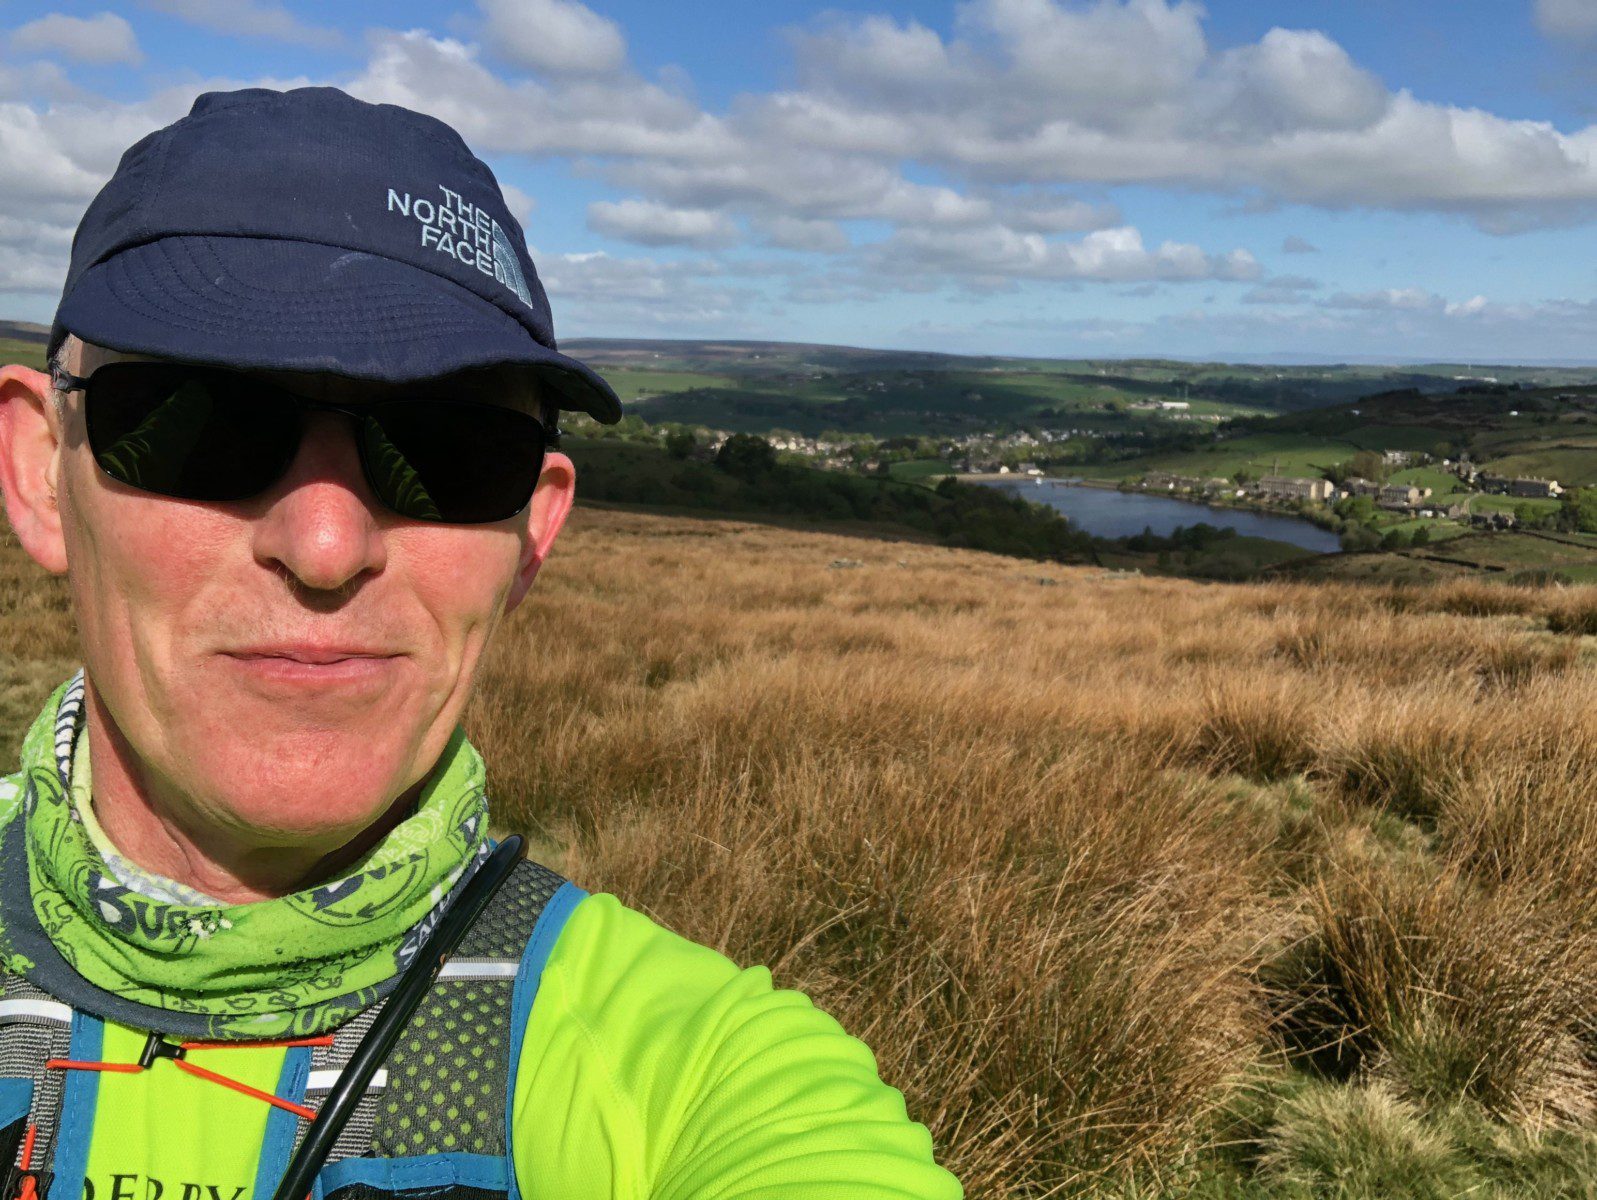 The St Leonard’s Way and Me – Gary’s Story